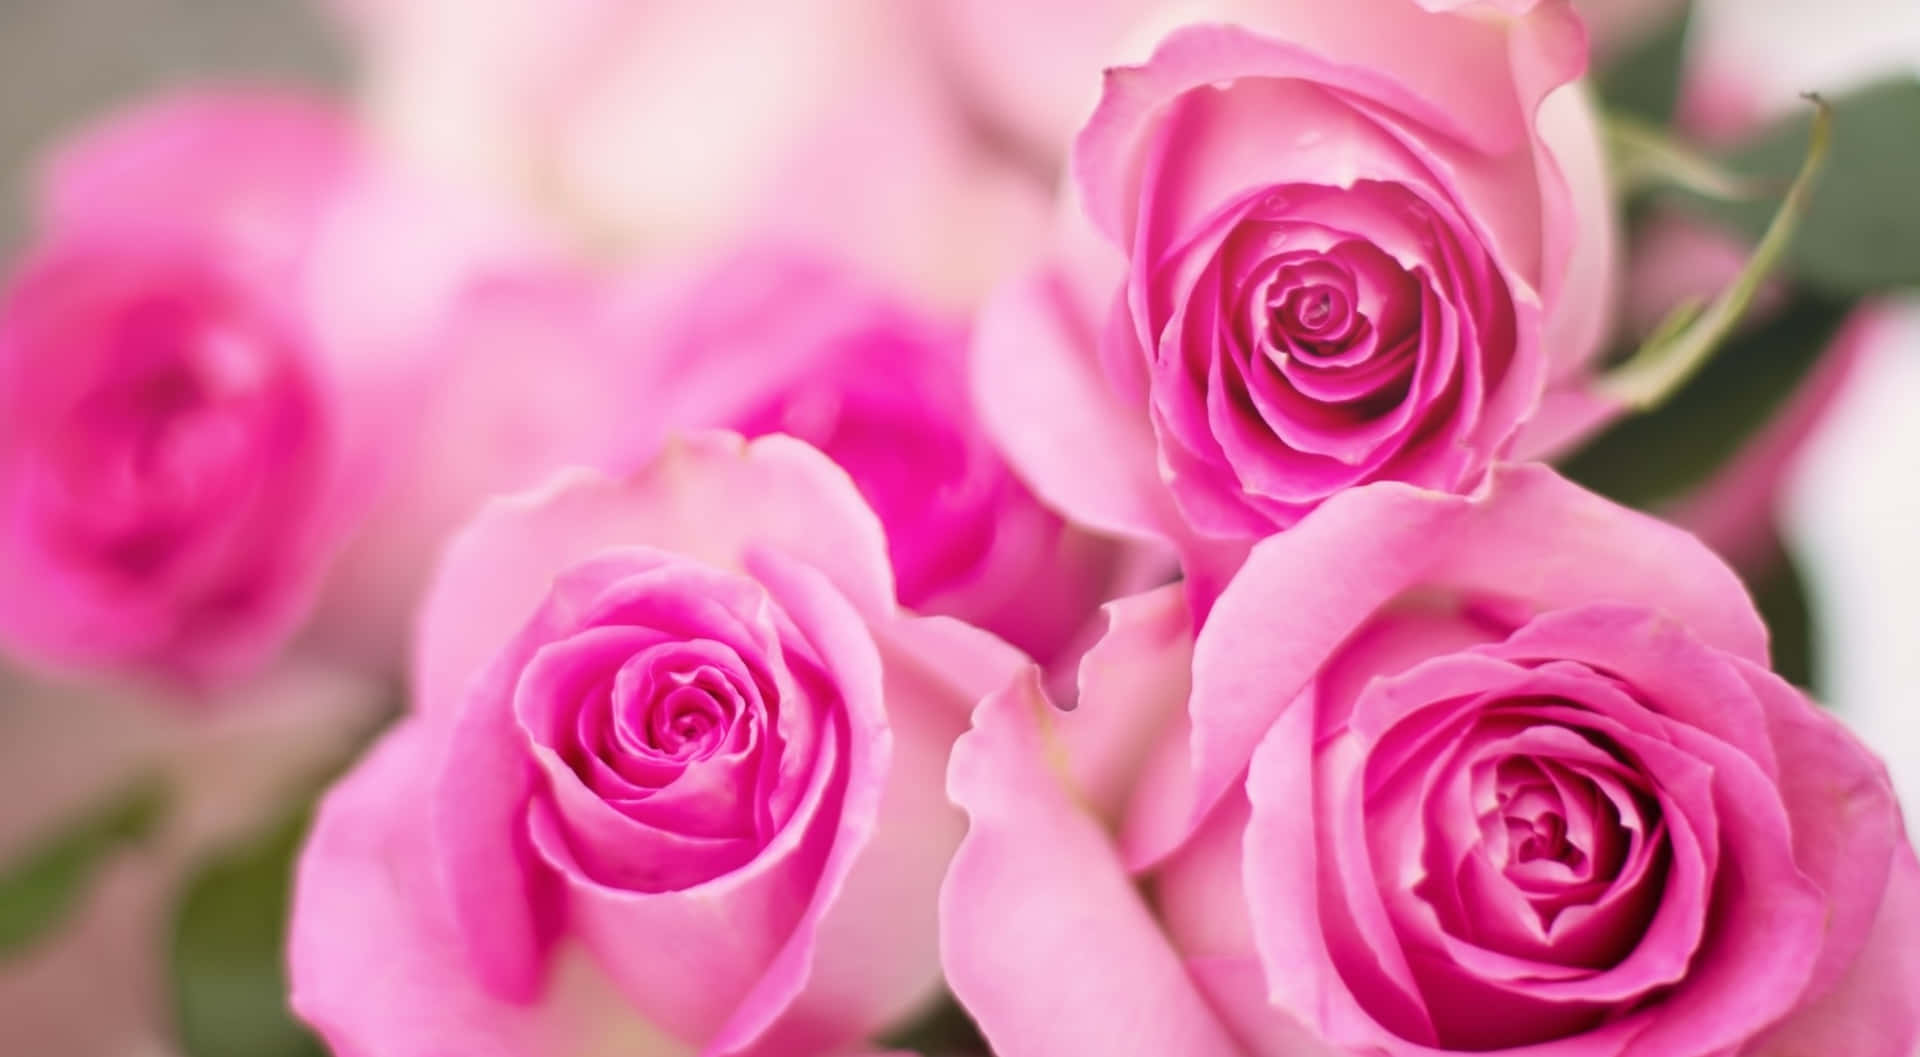 1440p Roses Background 2551 X 1405